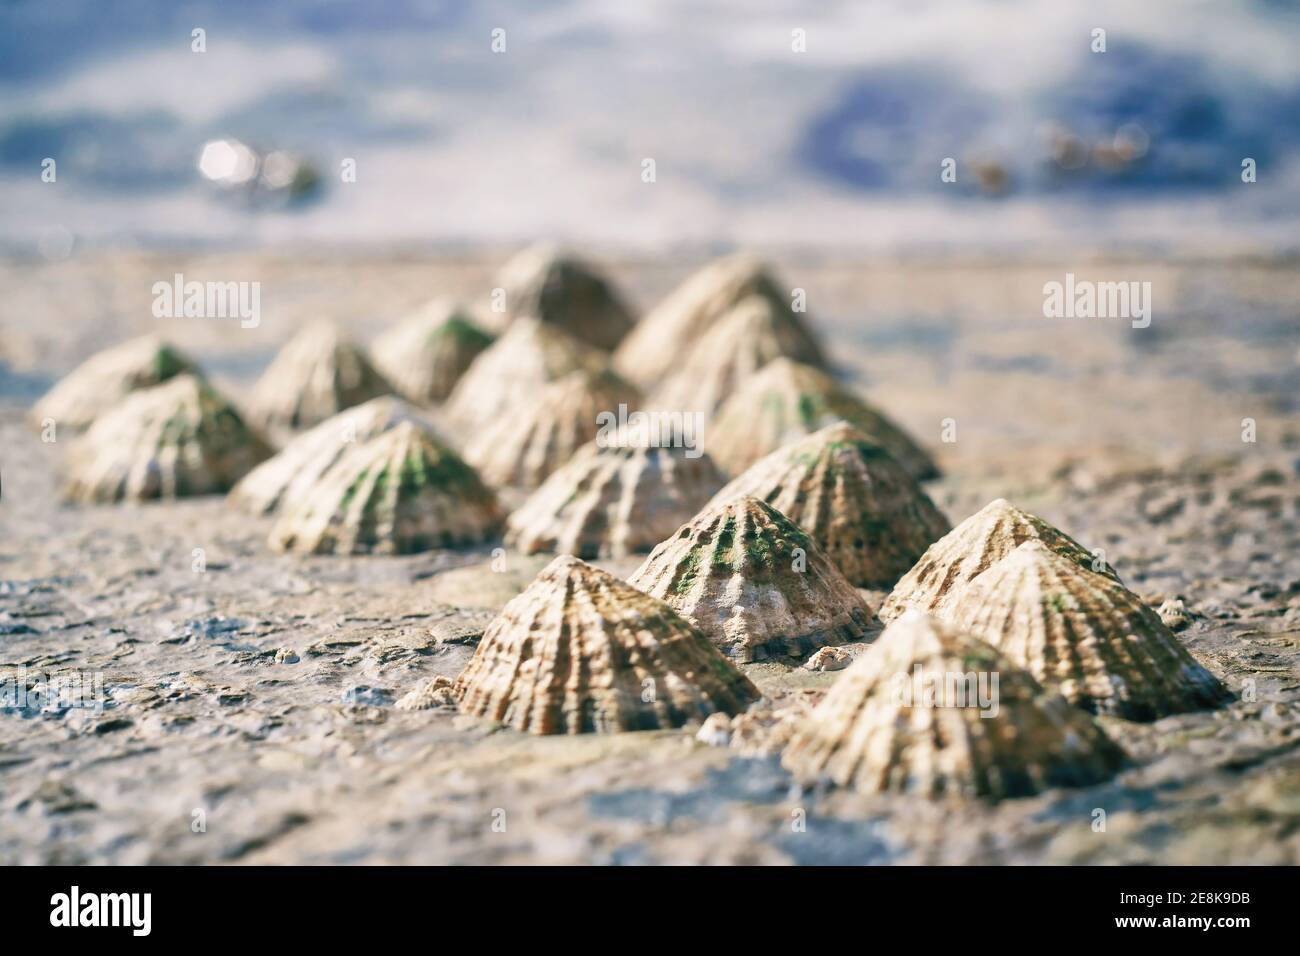 Group of limpet snail shells stuck on rocks with blurred background Stock Photo